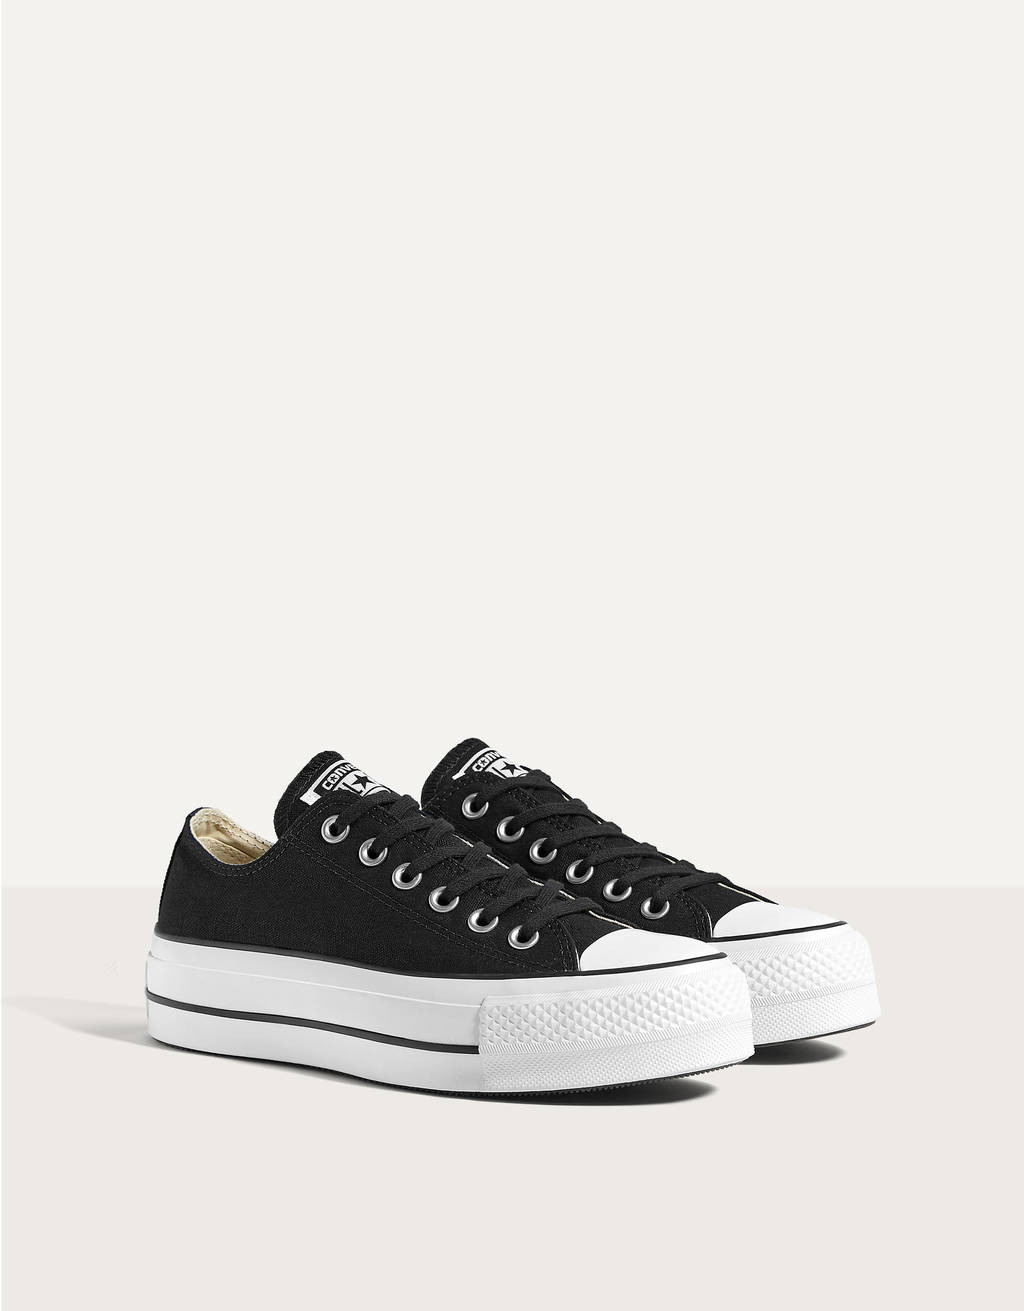 Converse Doble Suela Bota on Sale, 57% OFF | www.hcb.cat عصير تفاح فوار